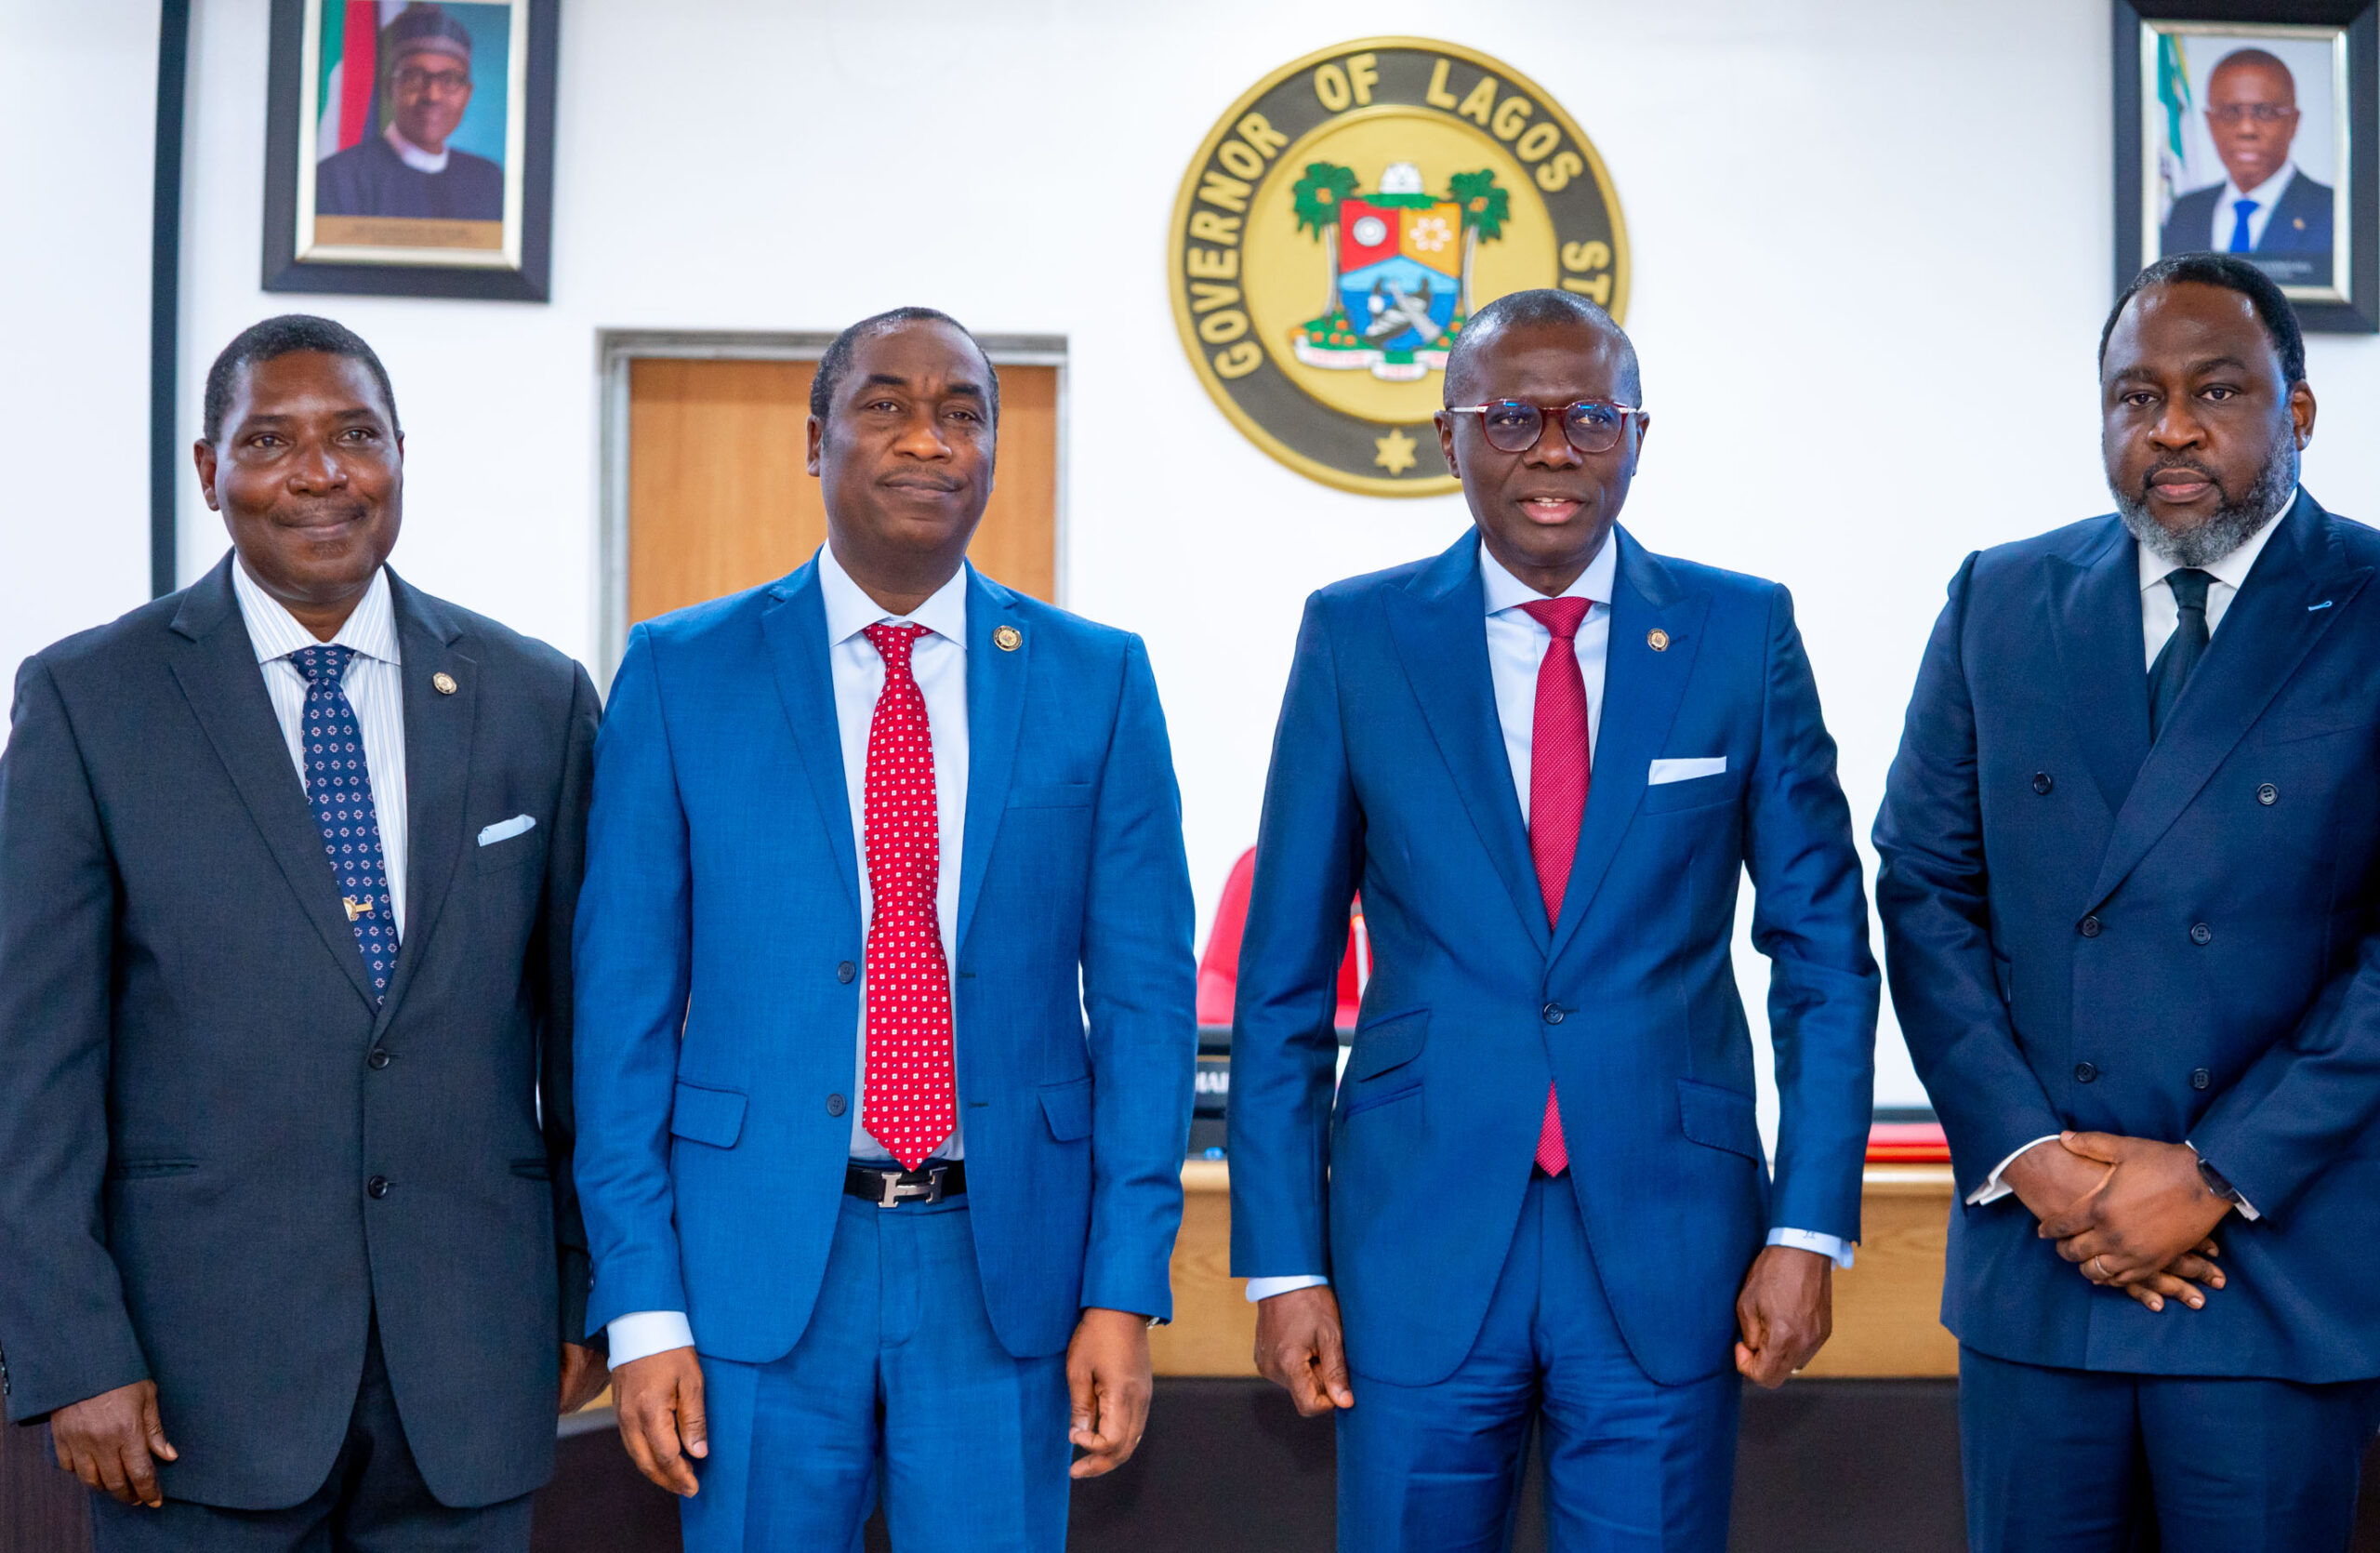 Photos: Gov. Sanwo-Olu Swears In Two New Exco Members At Lagos House, Ikeja On Monday M